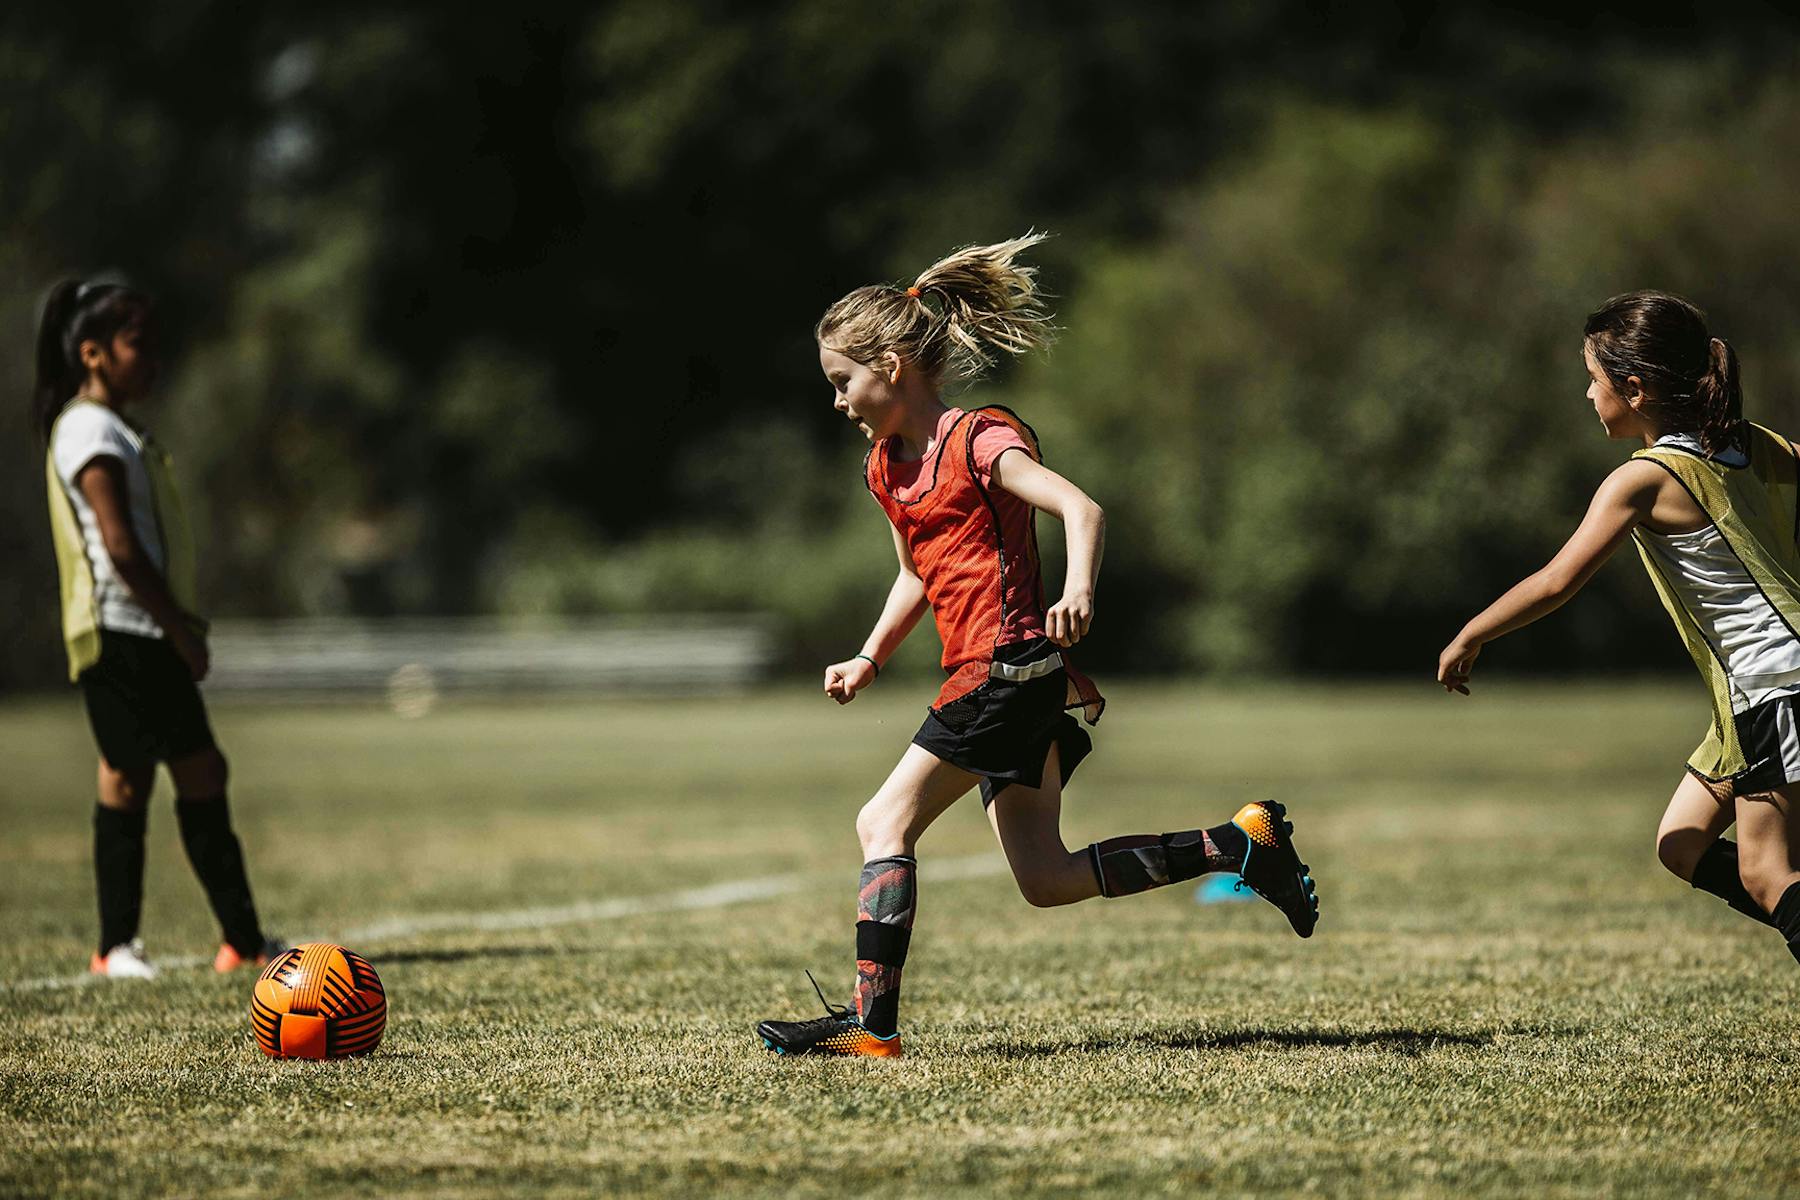 Girl in red jersey playing soccer